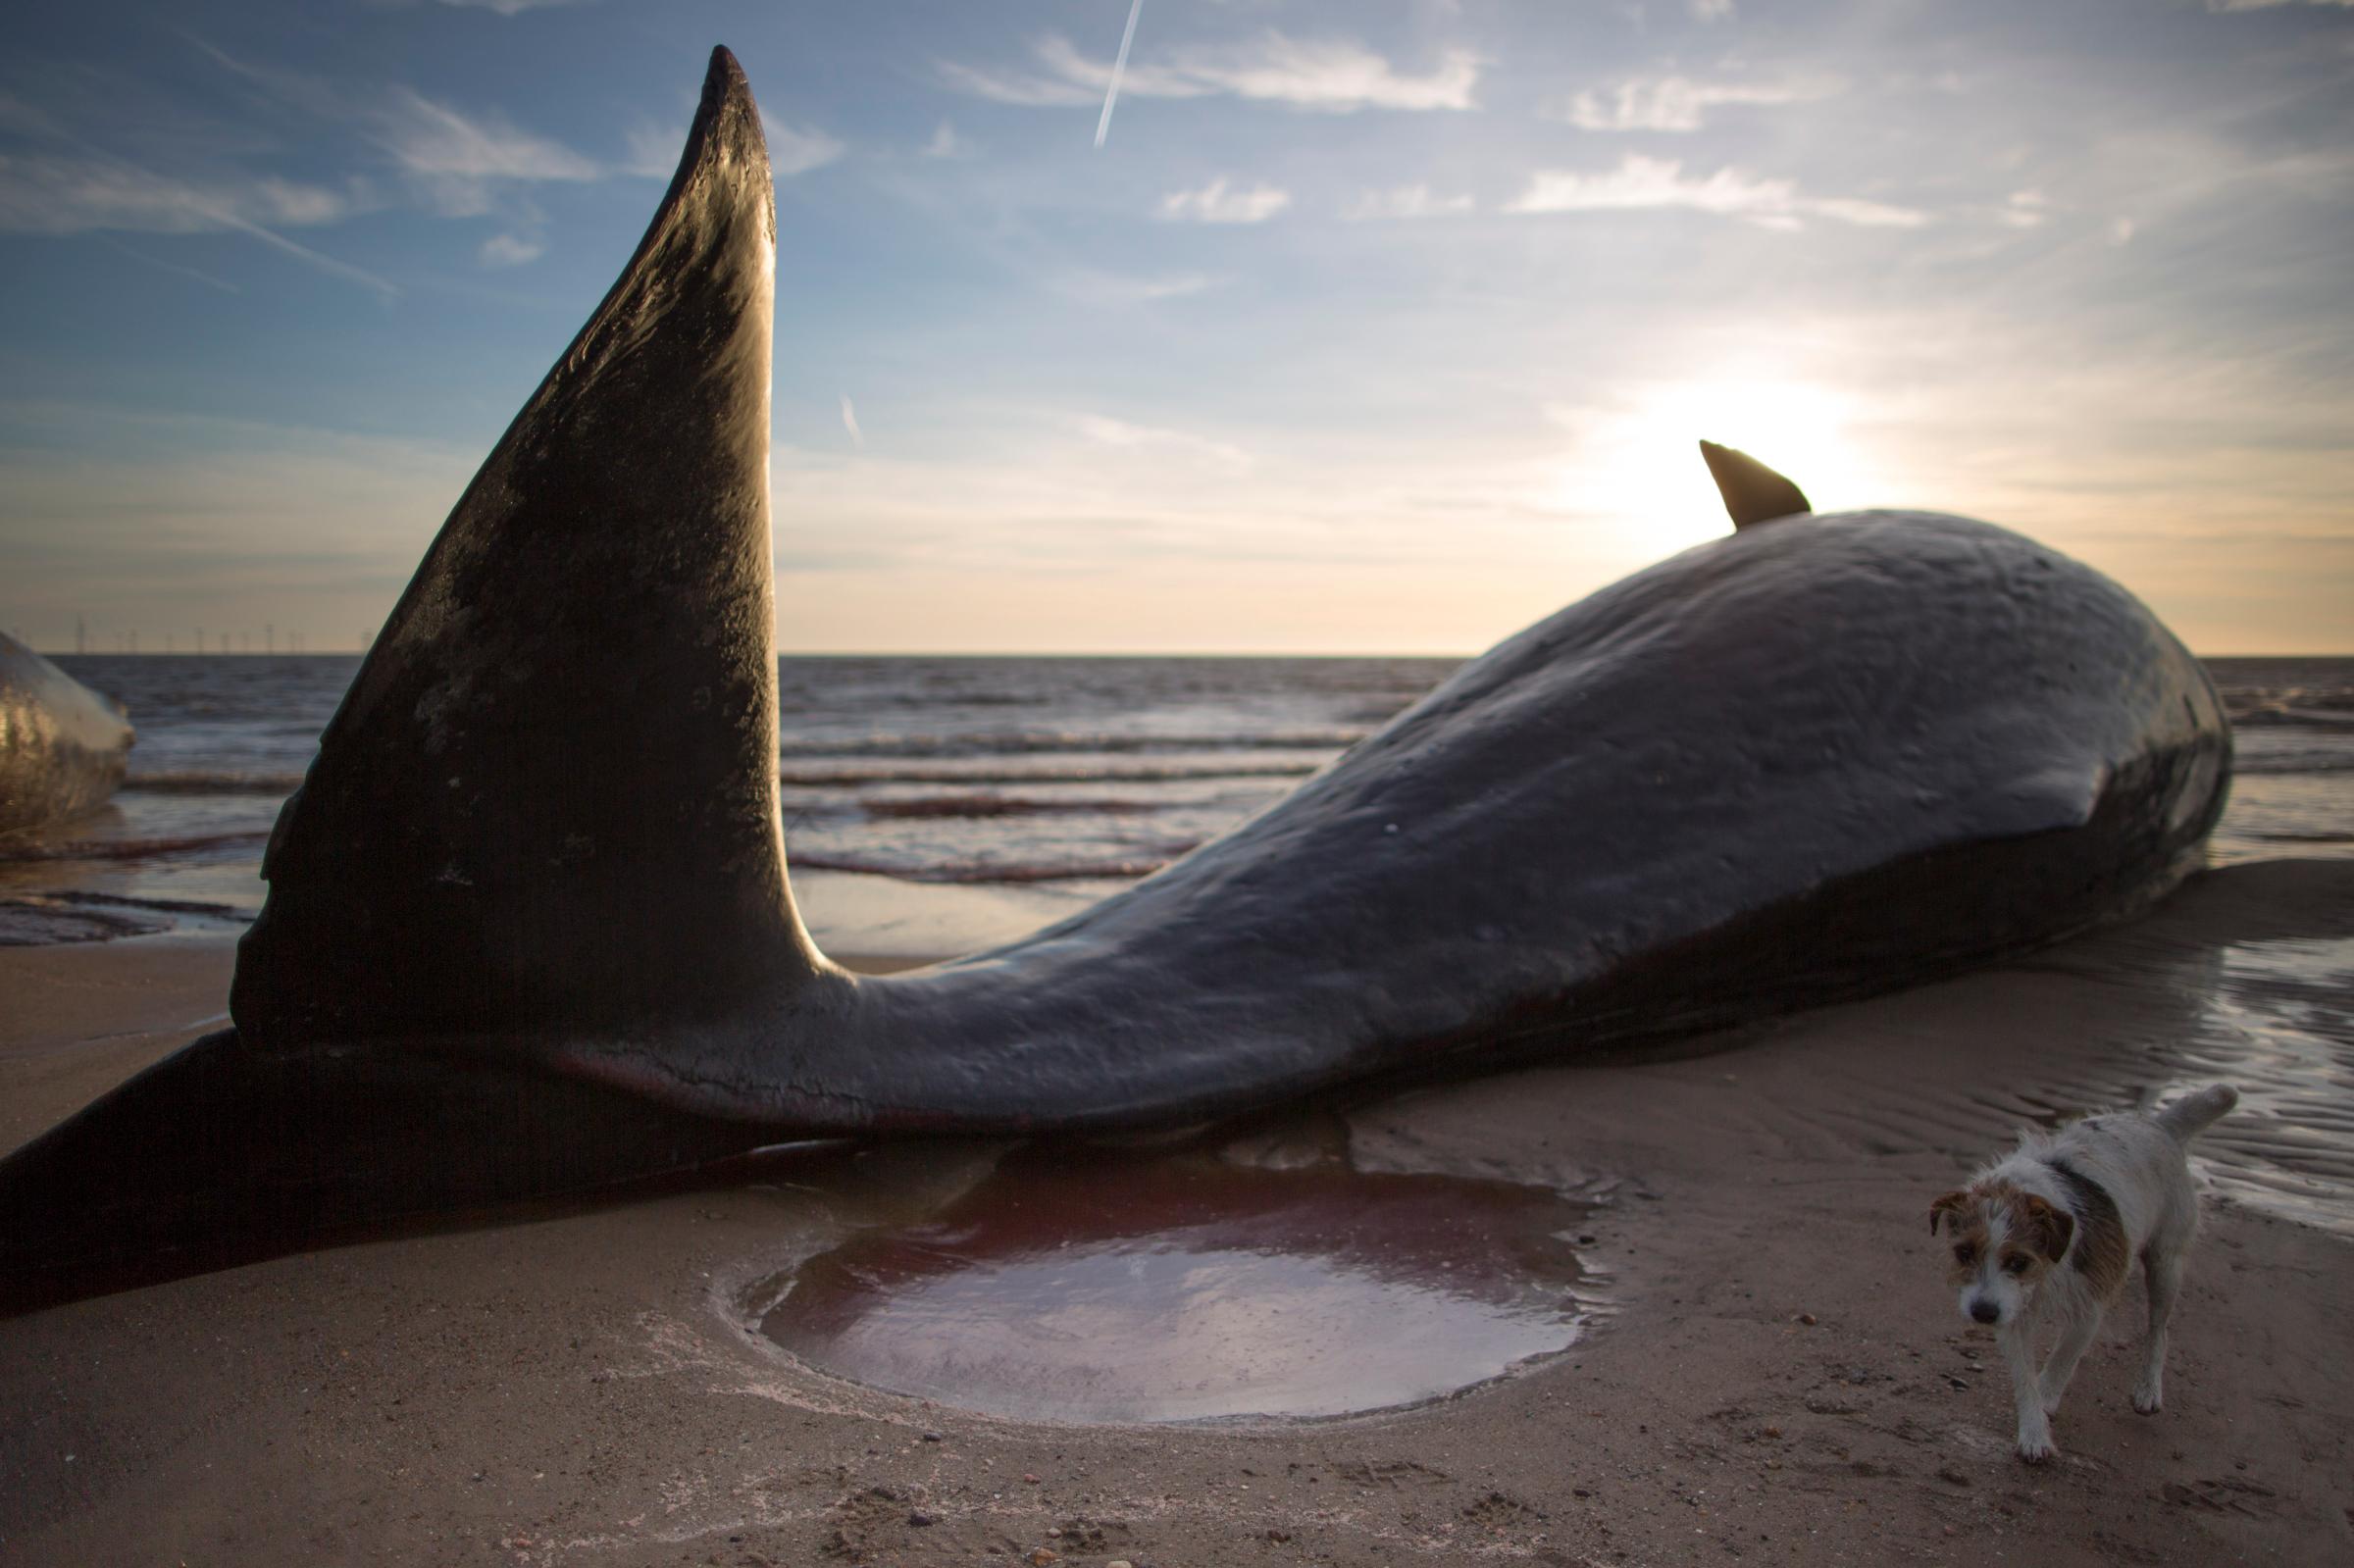 One of three Sperm Whales, which were found washed ashore, lays on a beach in Skegness, England, on Jan. 25, 2016.